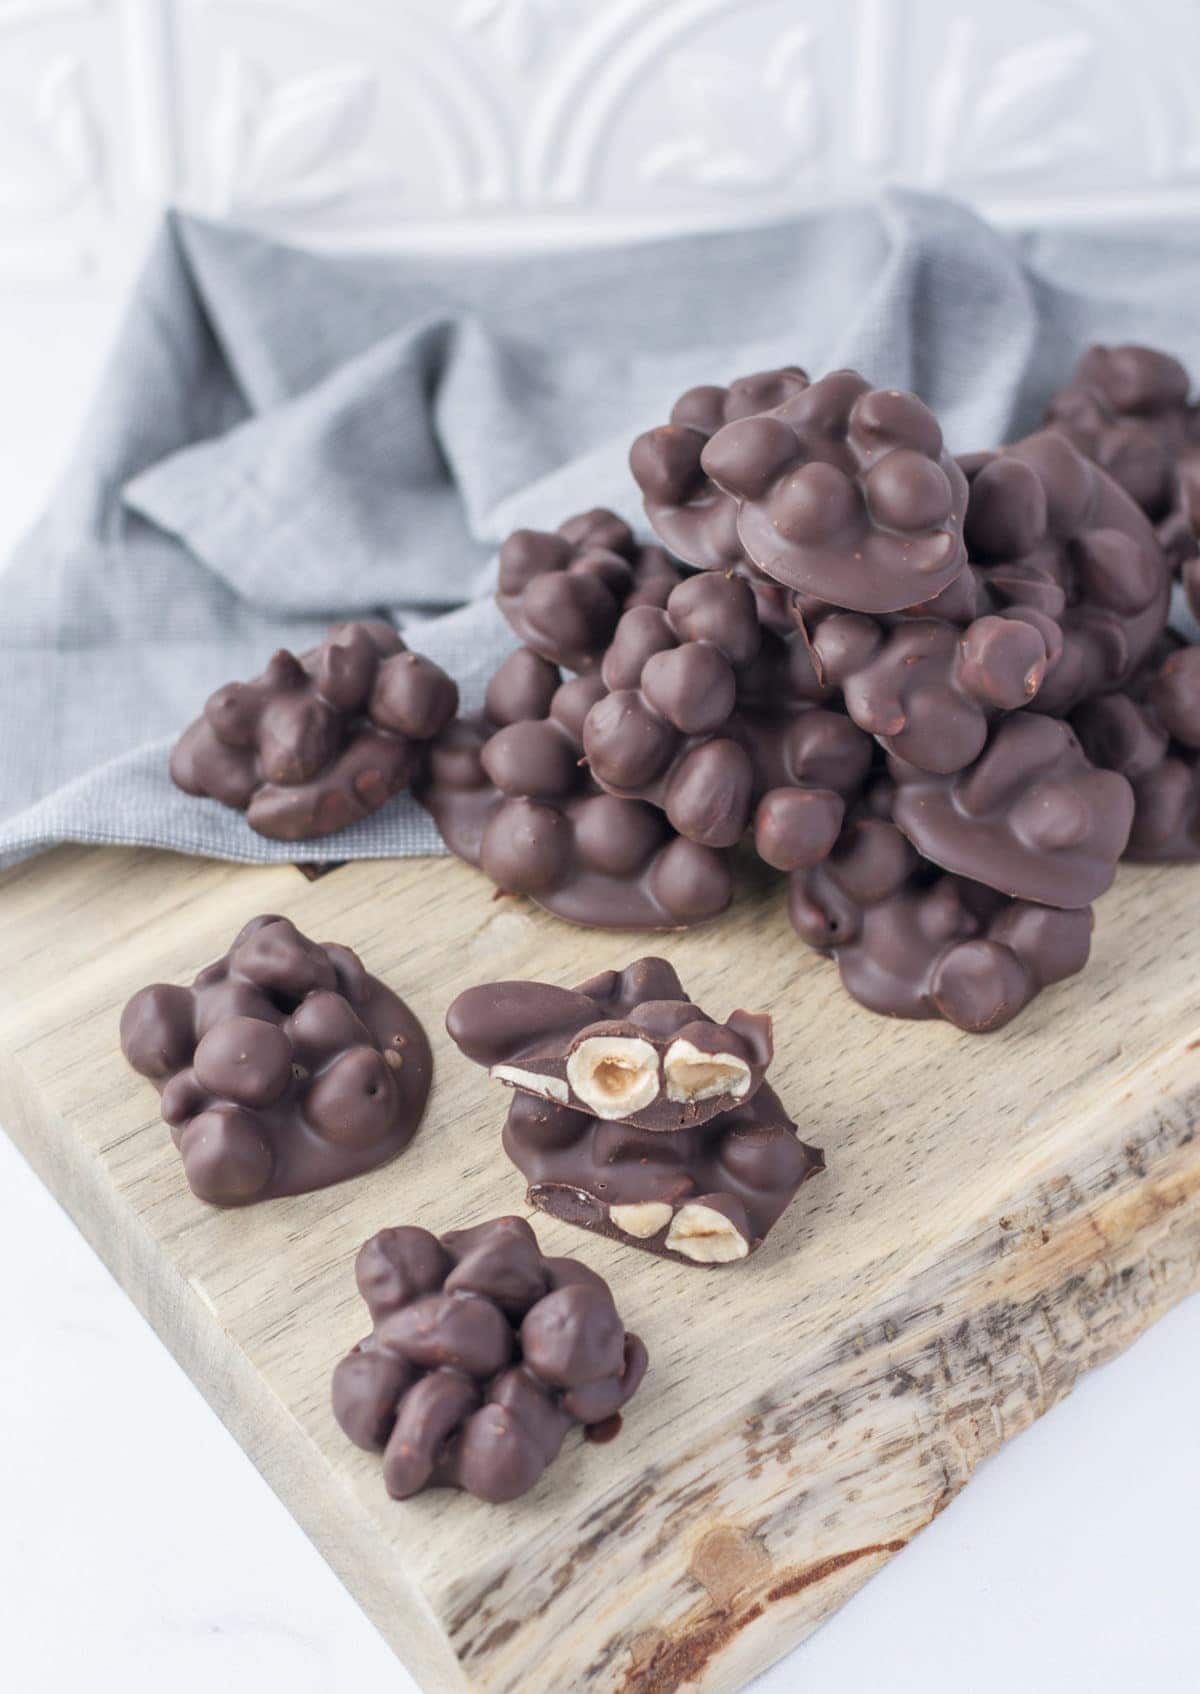 Keto Chocolate Nut Clusters | Peace Love and Low Carb